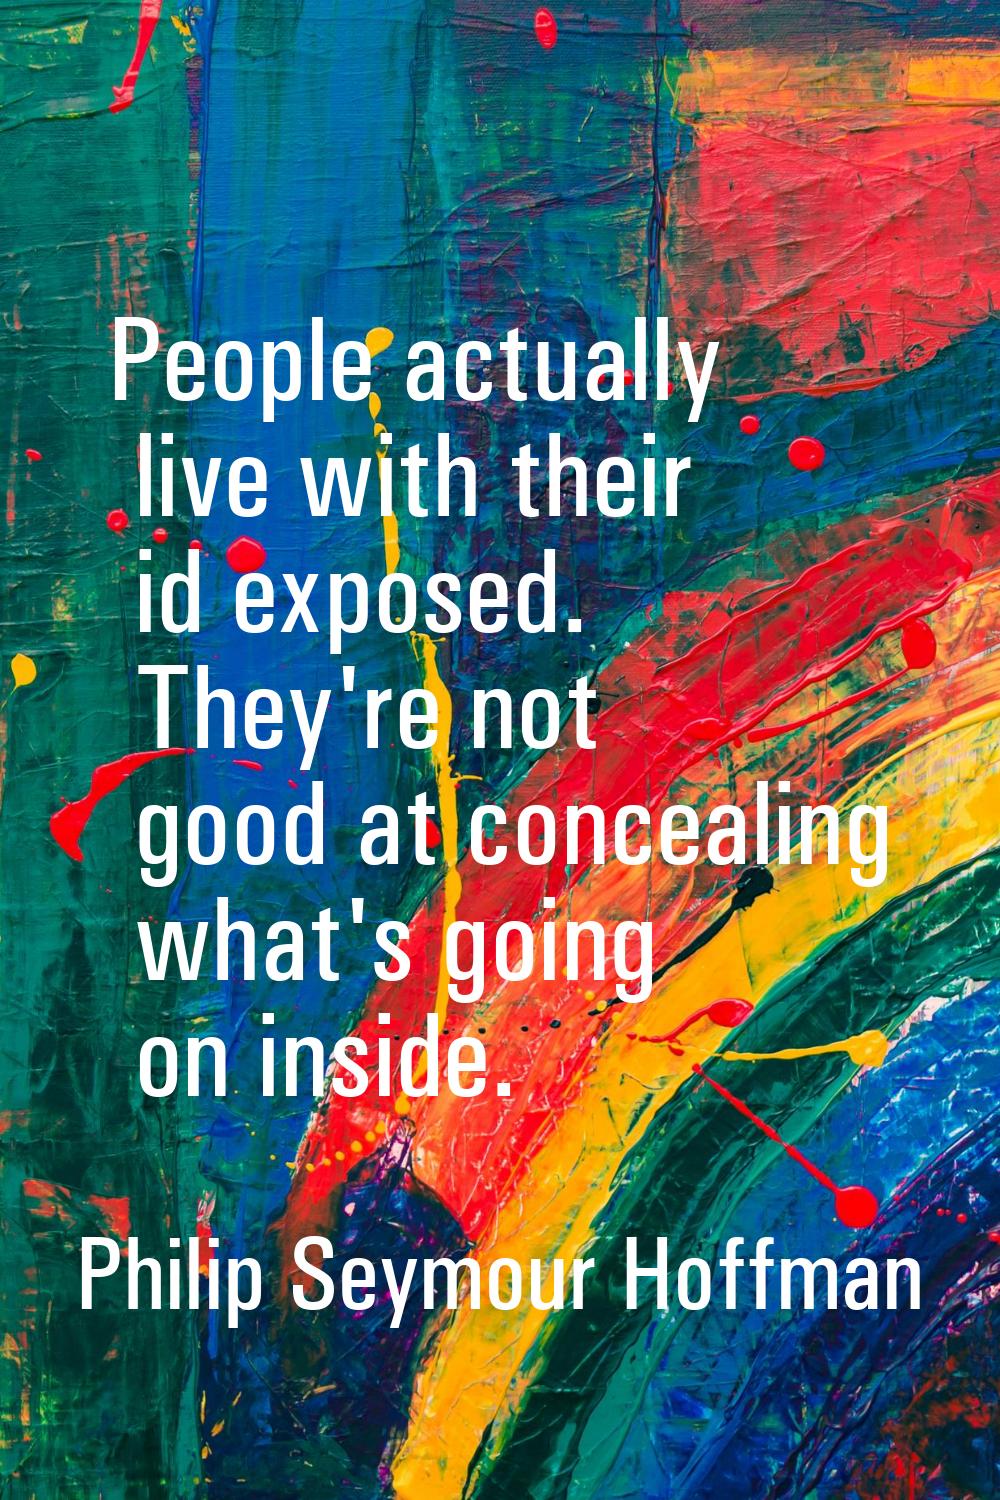 People actually live with their id exposed. They're not good at concealing what's going on inside.